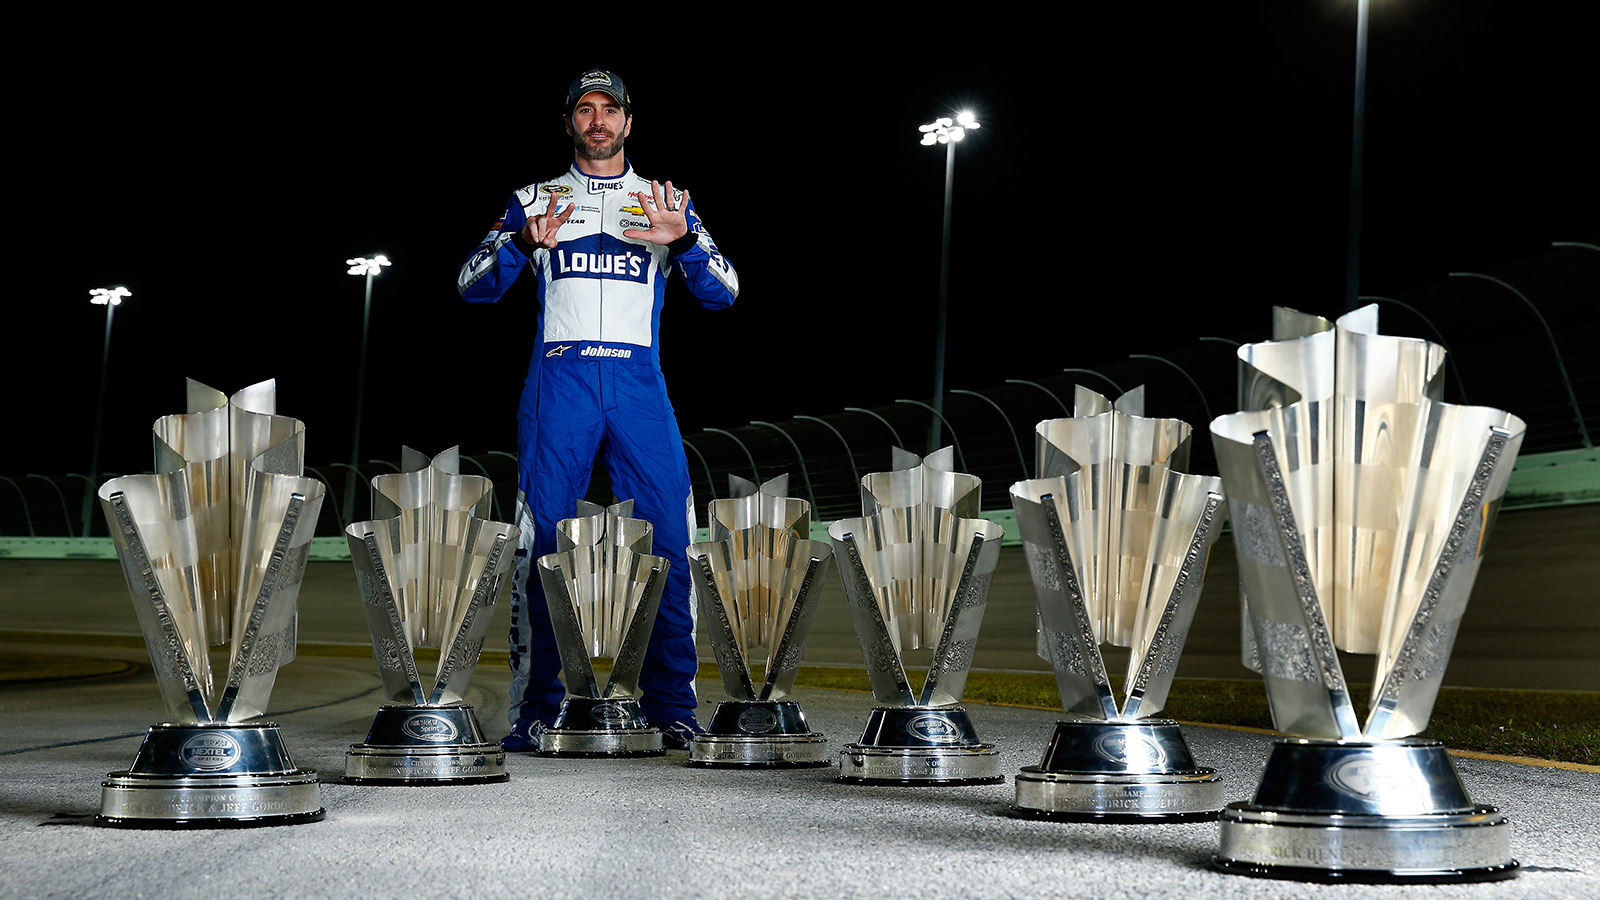 Seven-time Sprint Cup champion Jimmie Johnson's career highlights